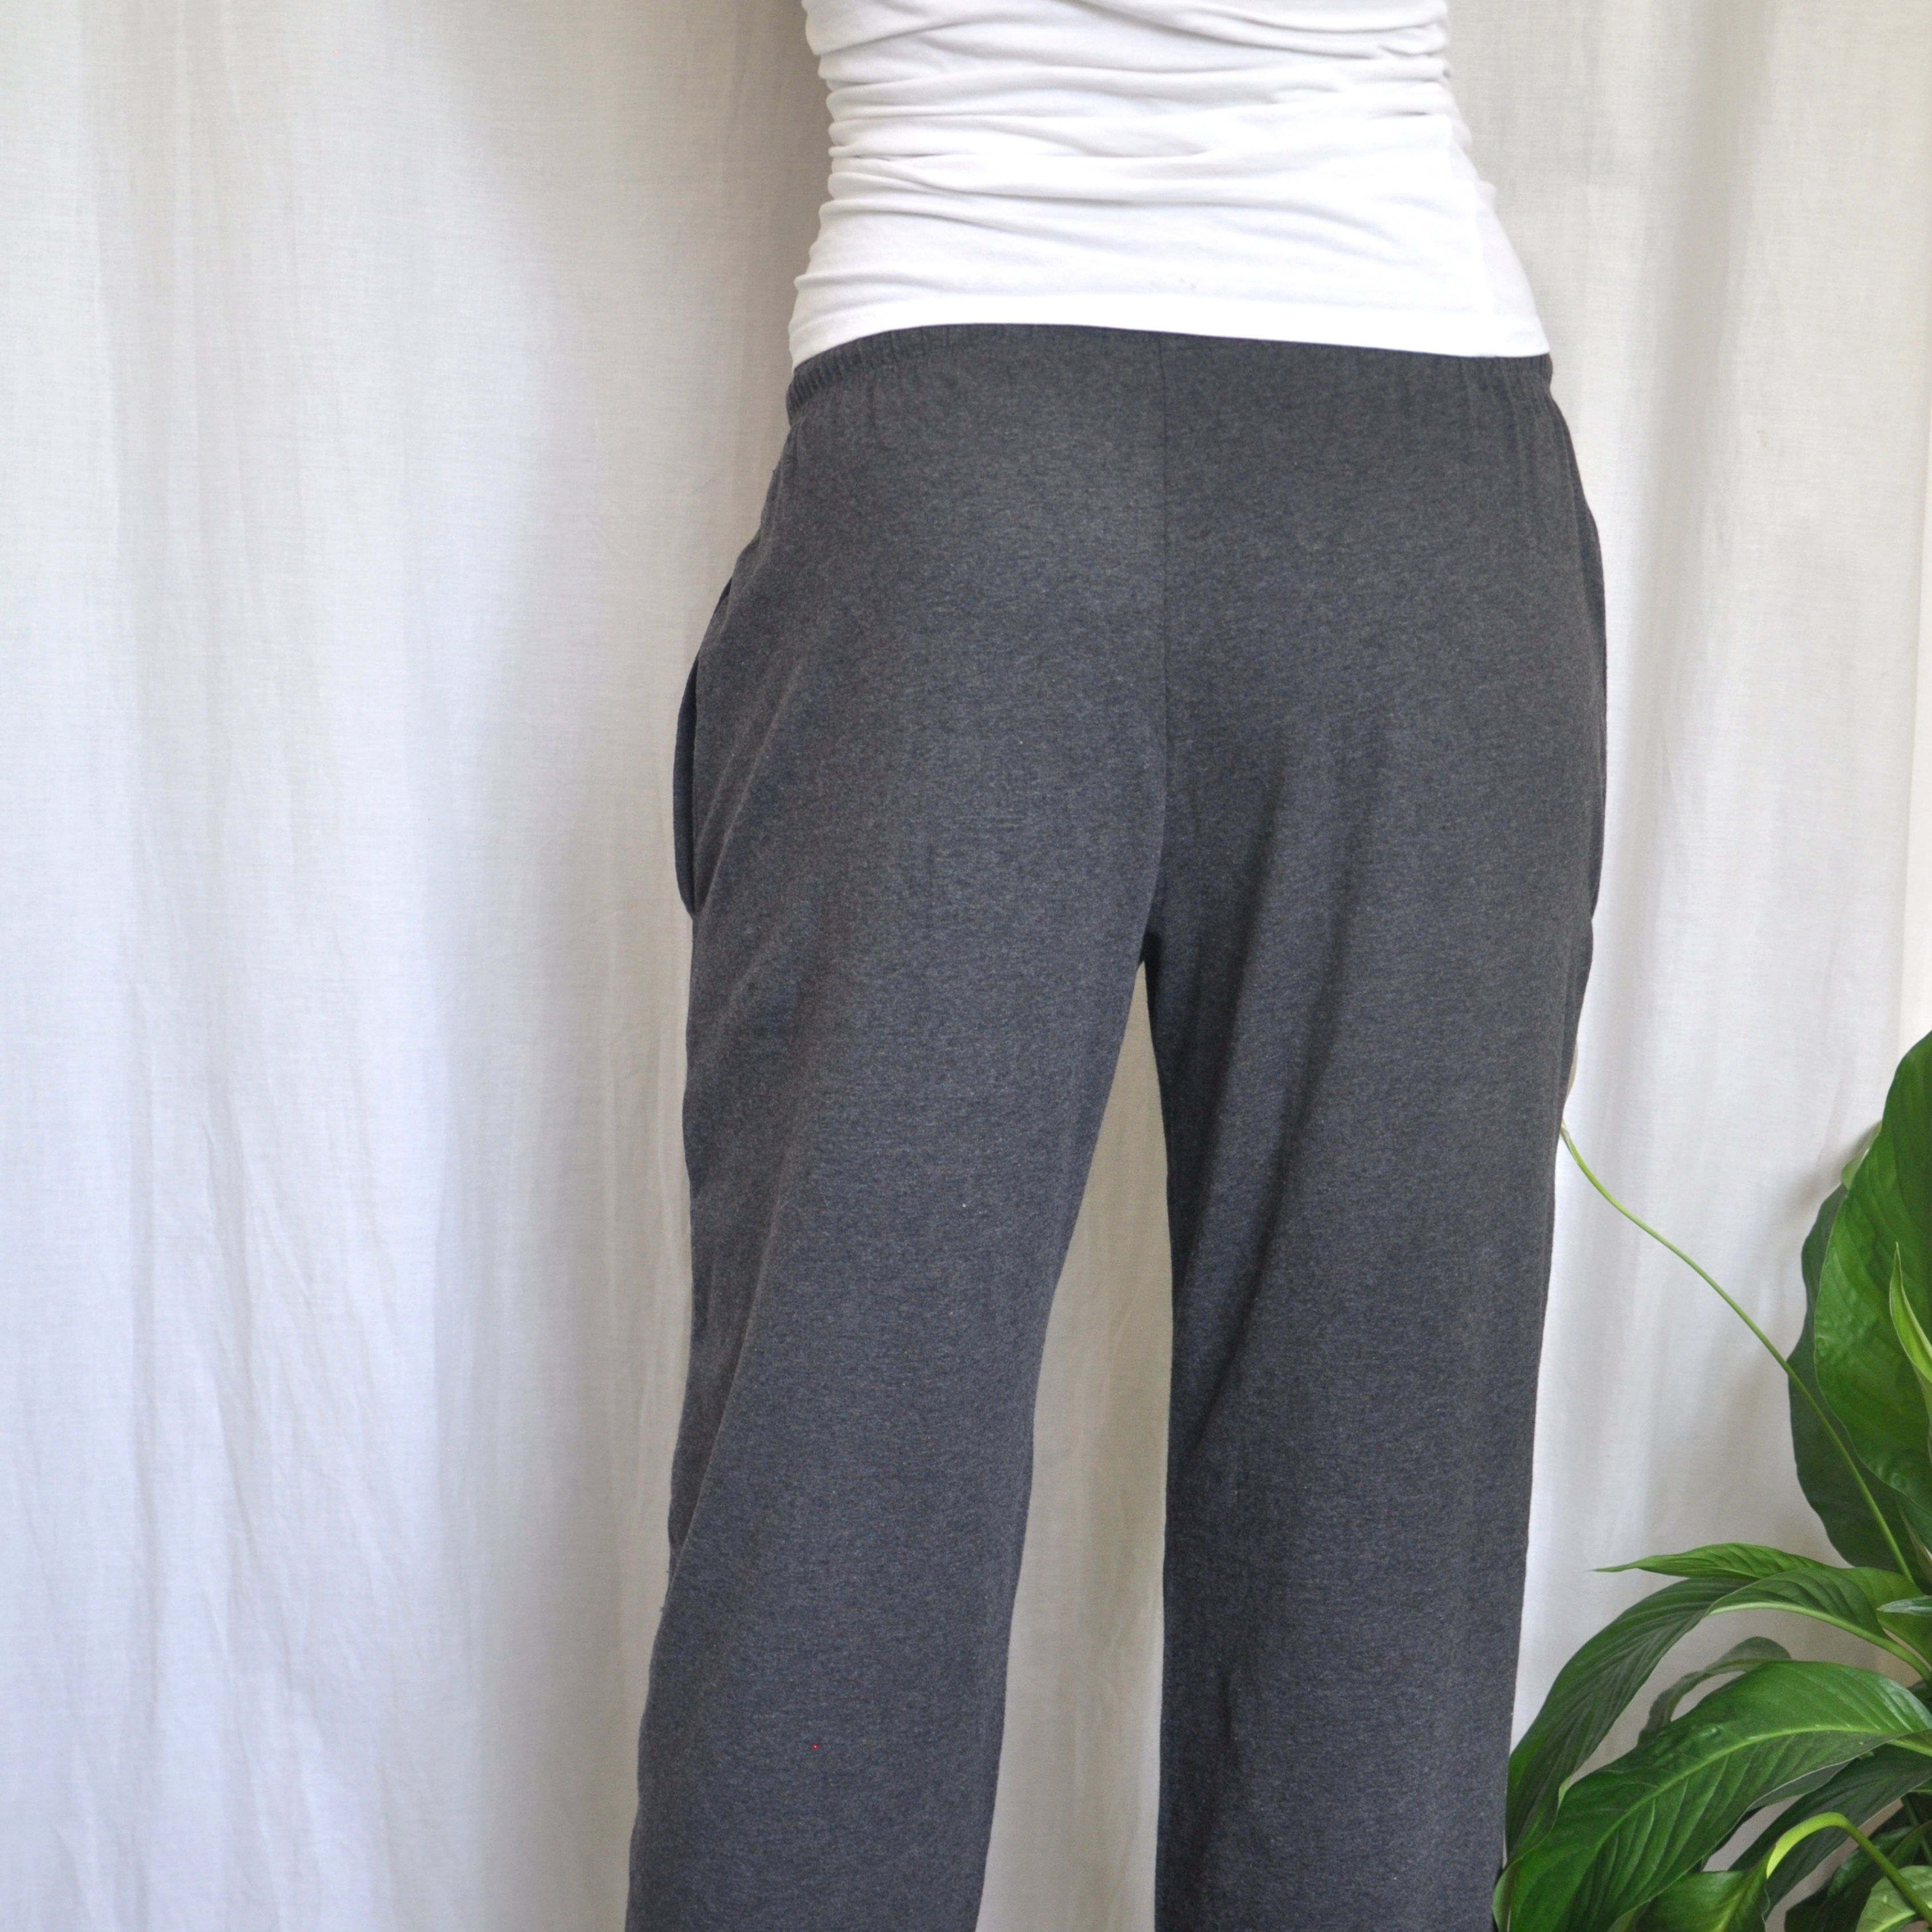 The image shows the lower back view of a person wearing dark grey pyjama bottoms and a white fitted top. The person is standing against a plain white background with a green potted plant visible in the bottom right corner of the frame. 